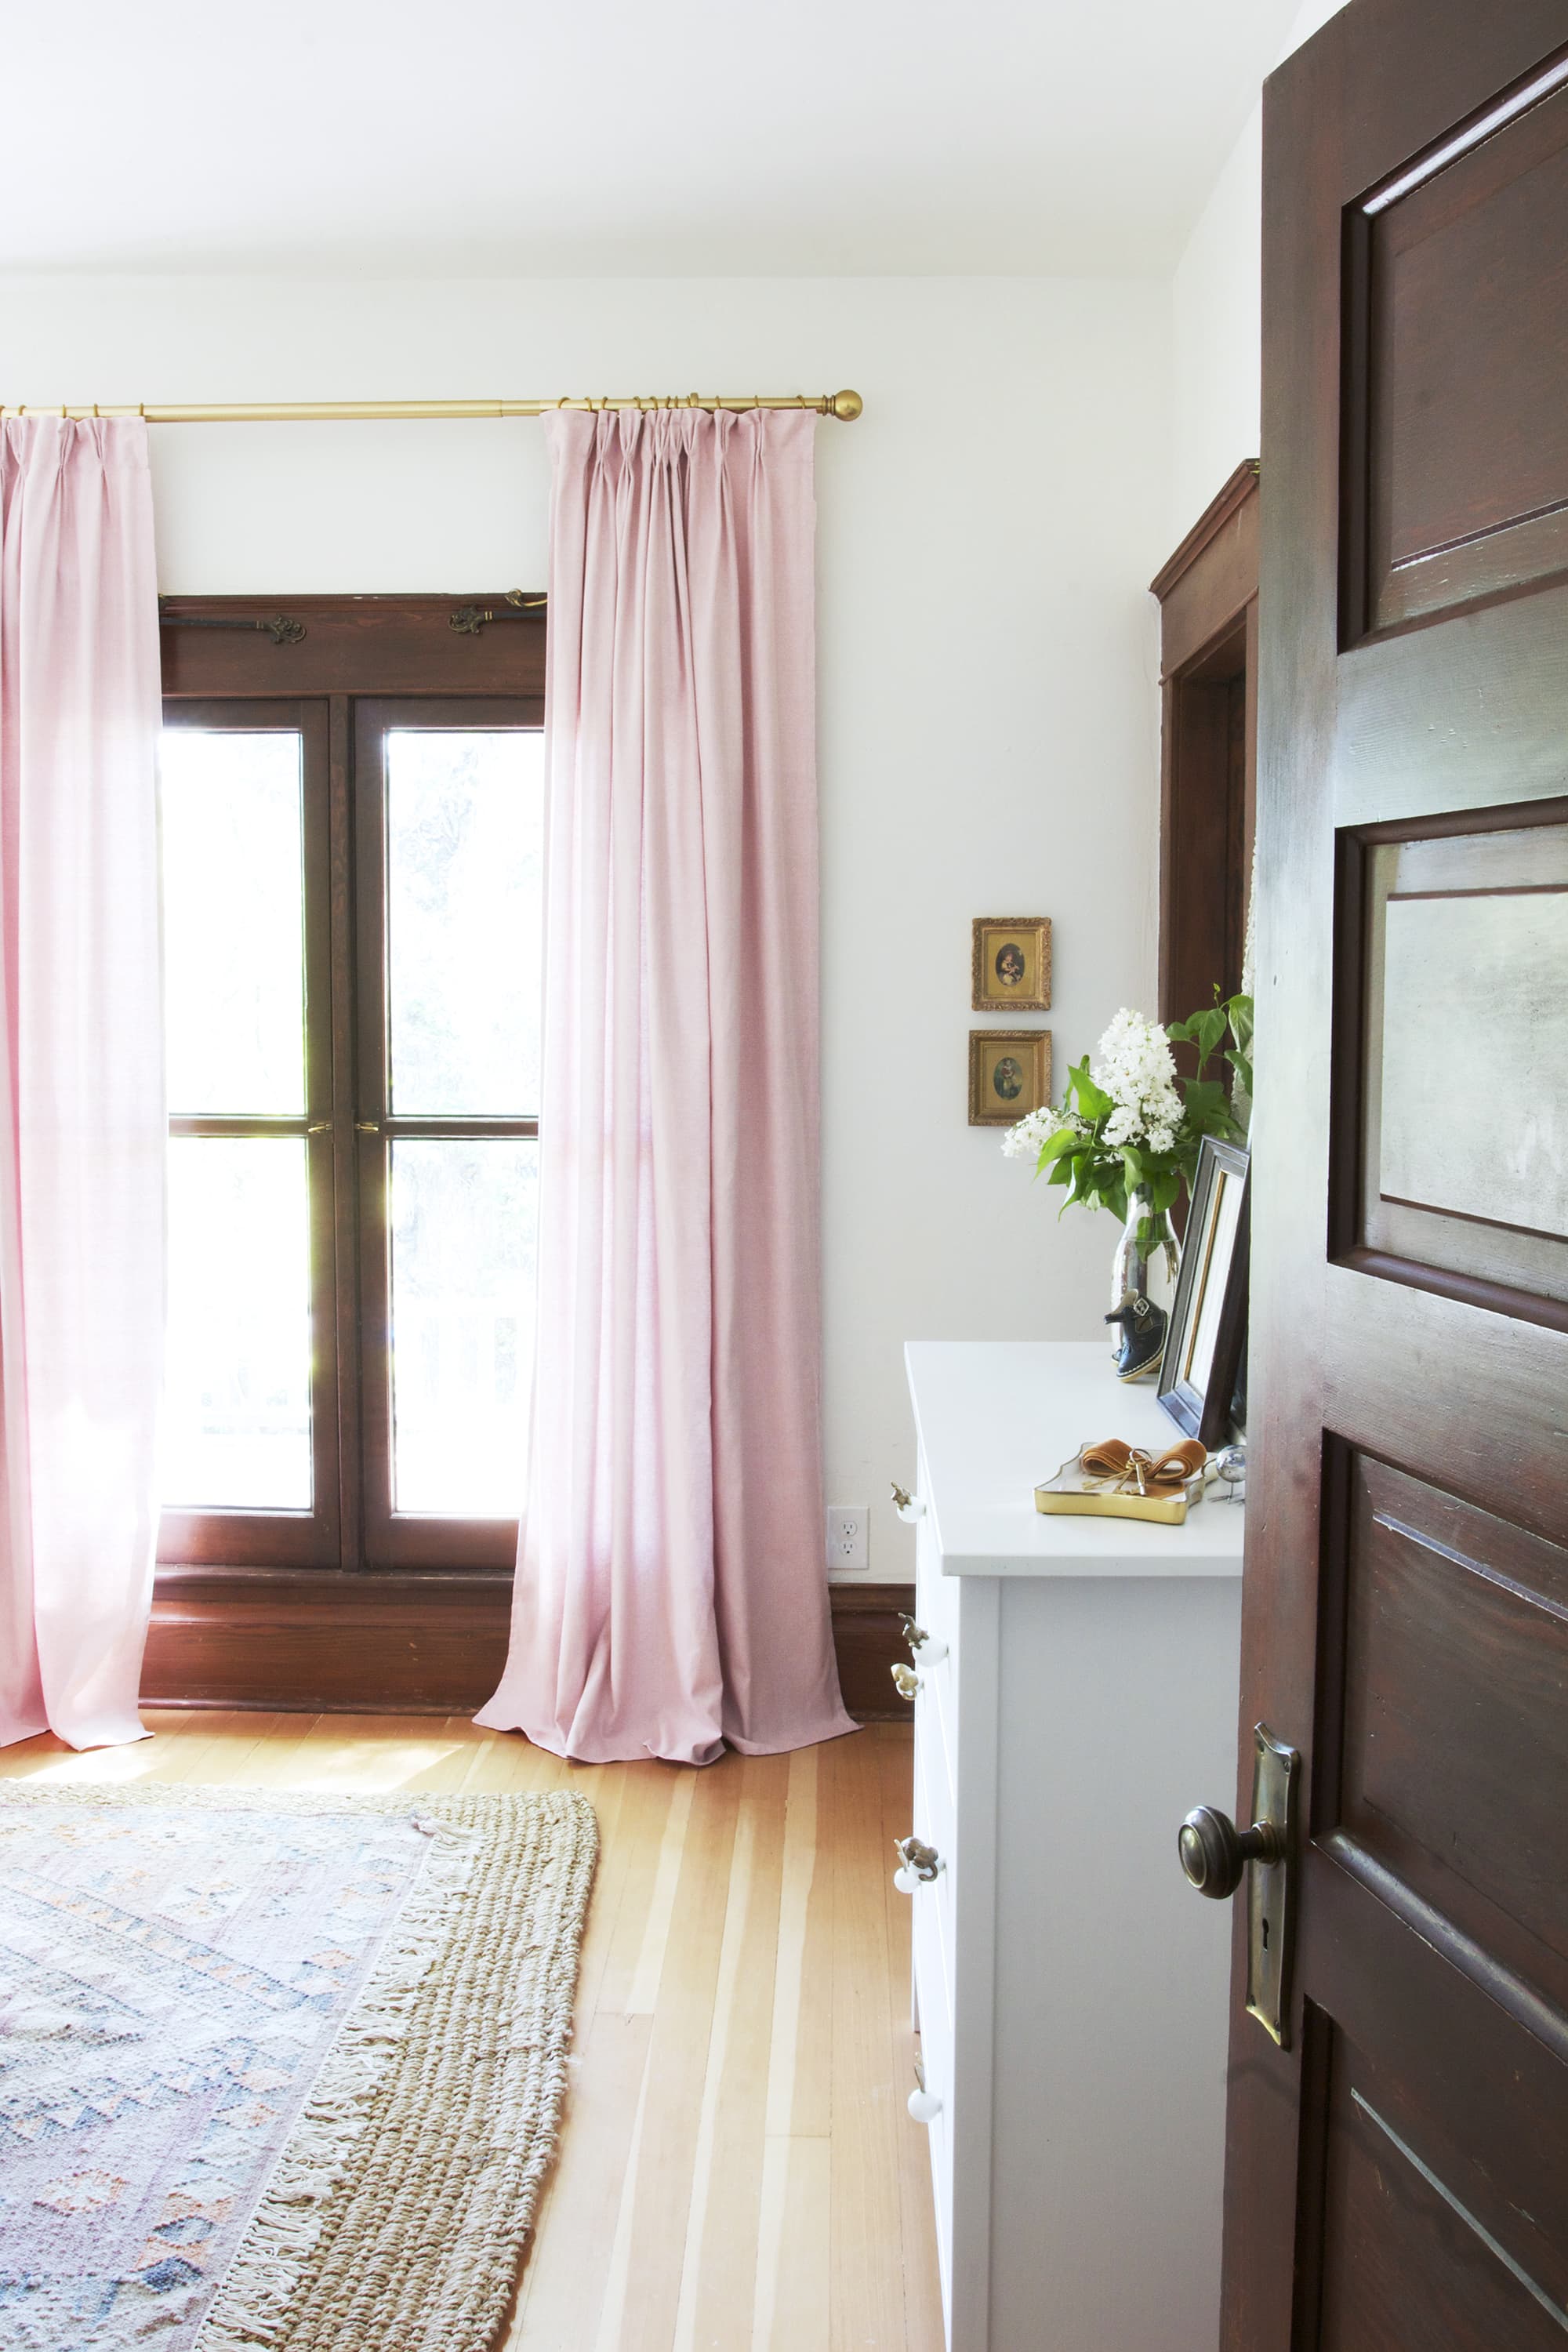 18 DIY Curtain Ideas   Easy Ways to Make Curtains   Apartment Therapy